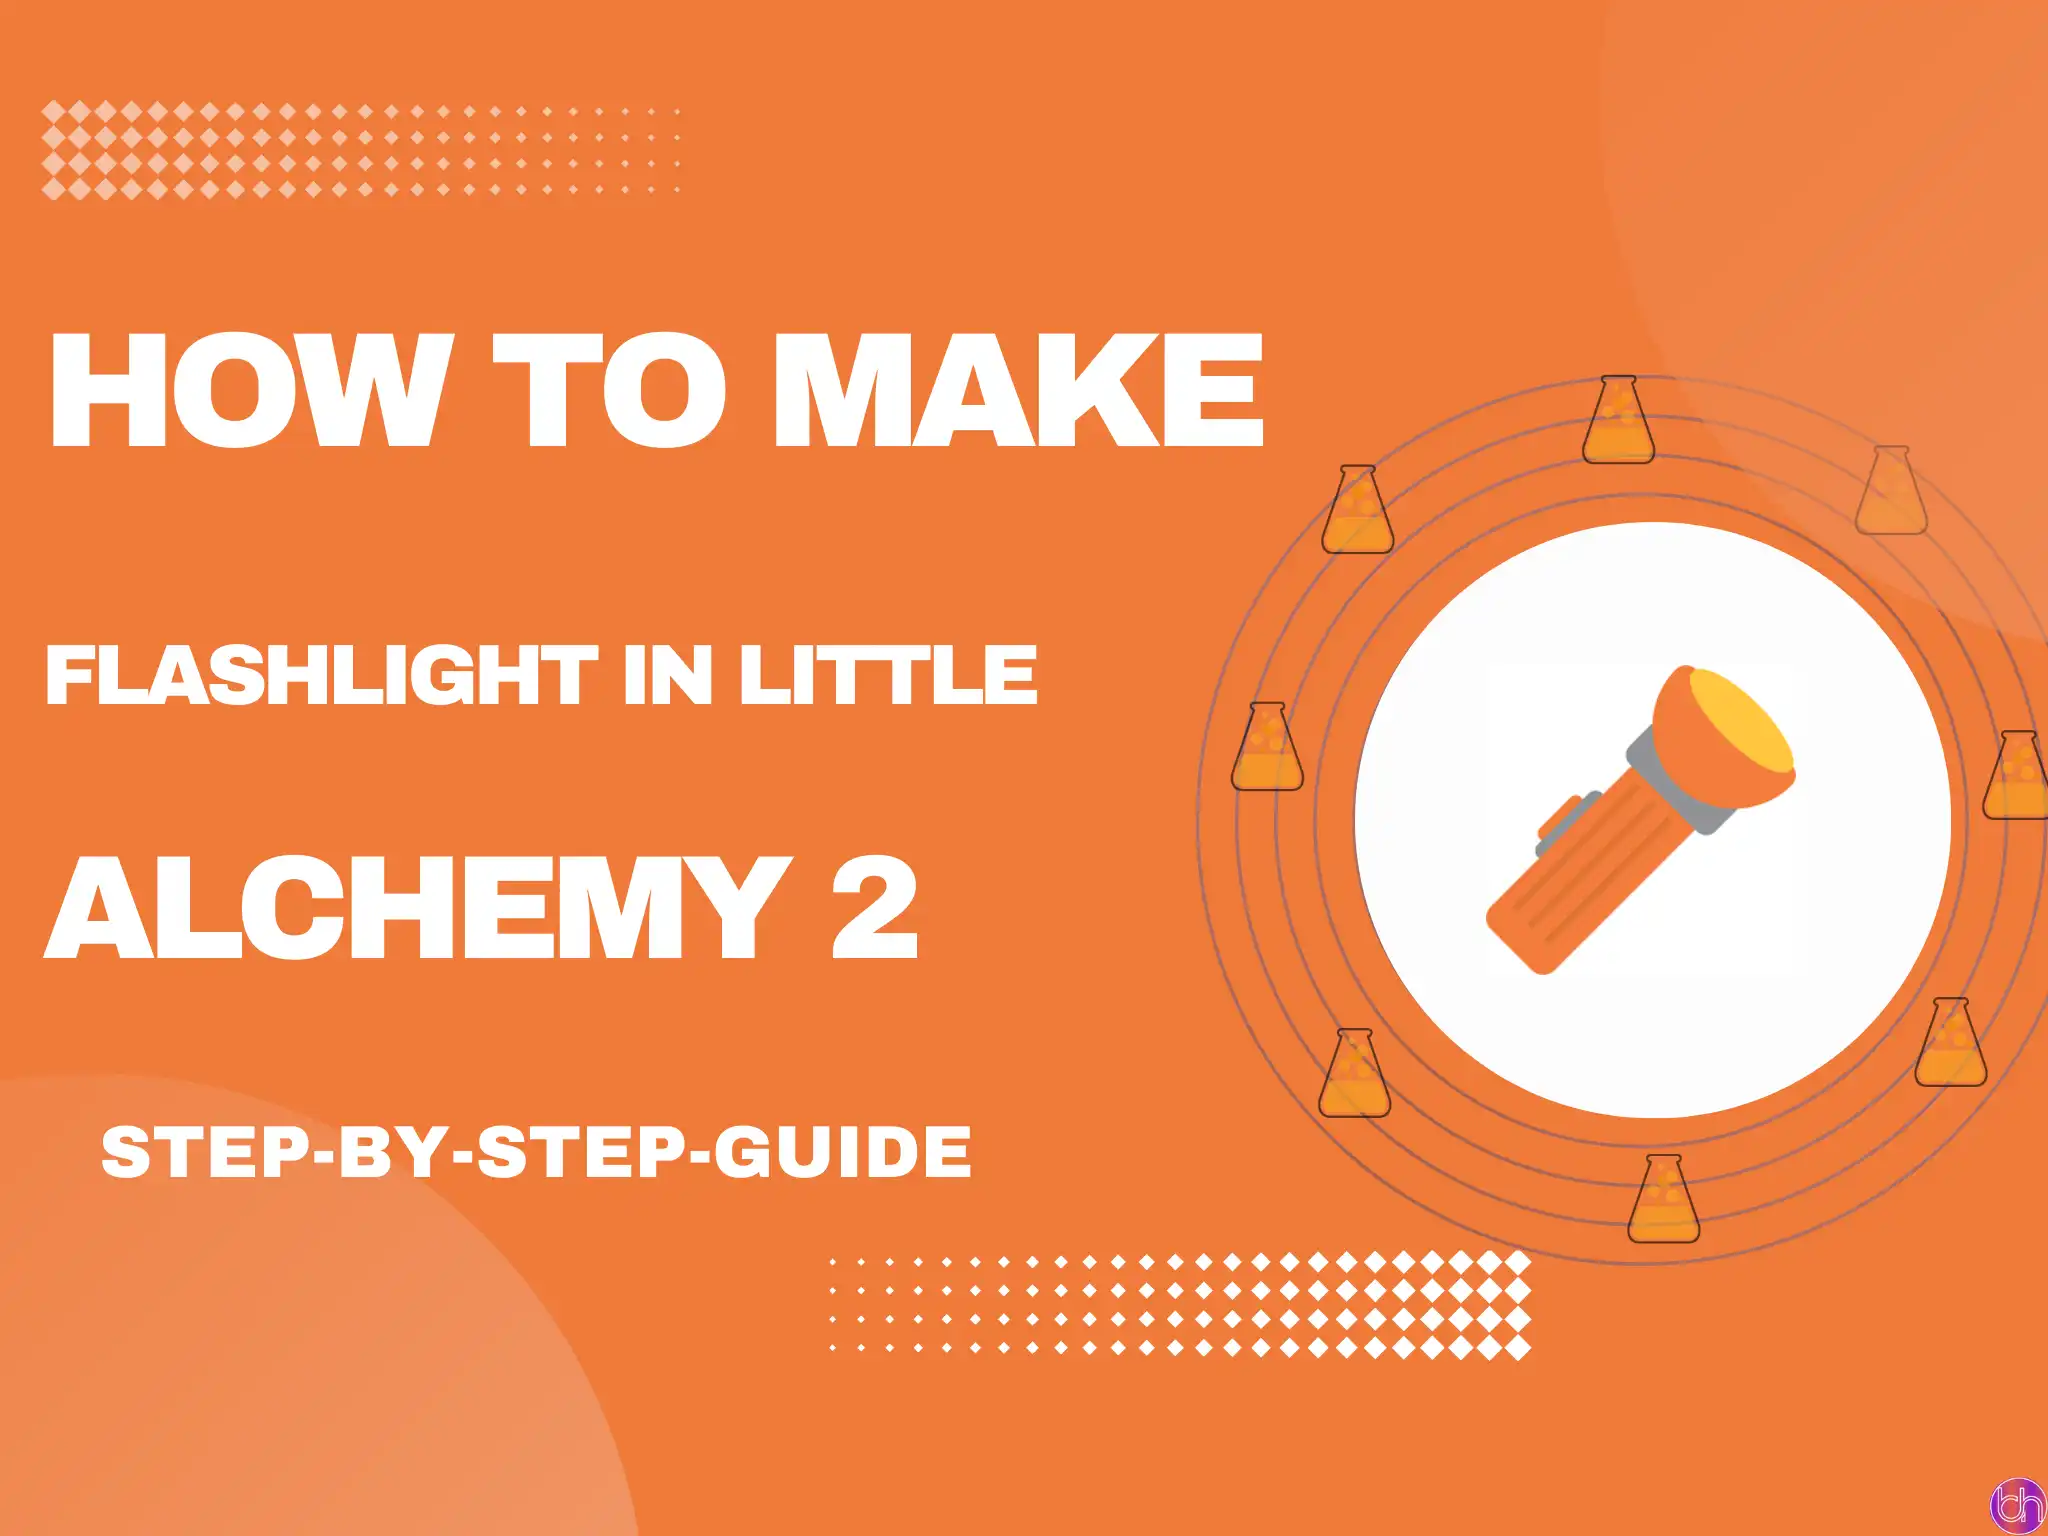 How to make Flashlight in Little Alchemy 2